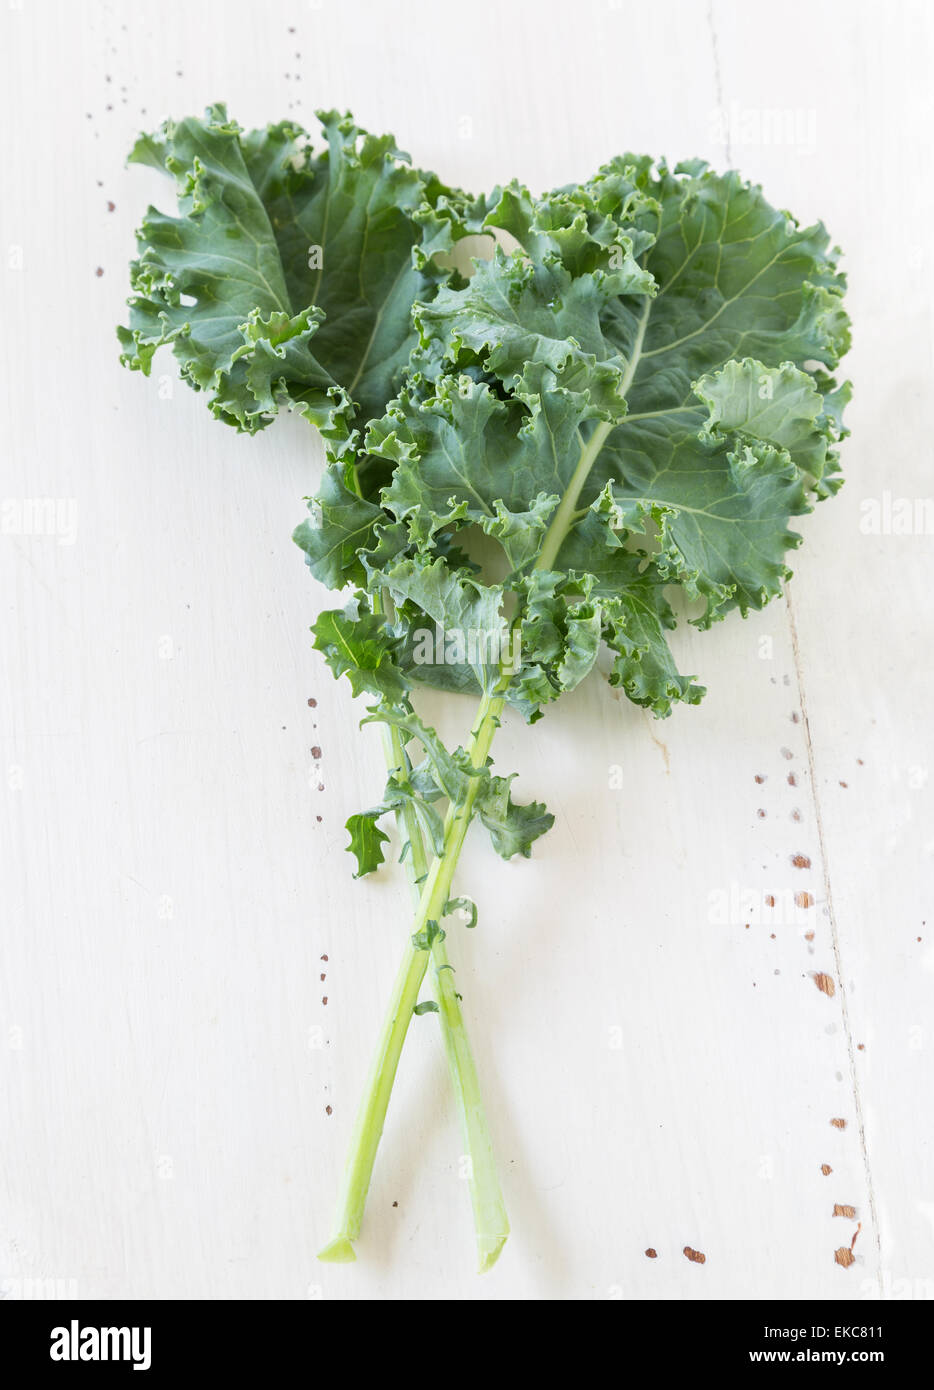 Kale leaves on a cream colored wooden background. Stock Photo